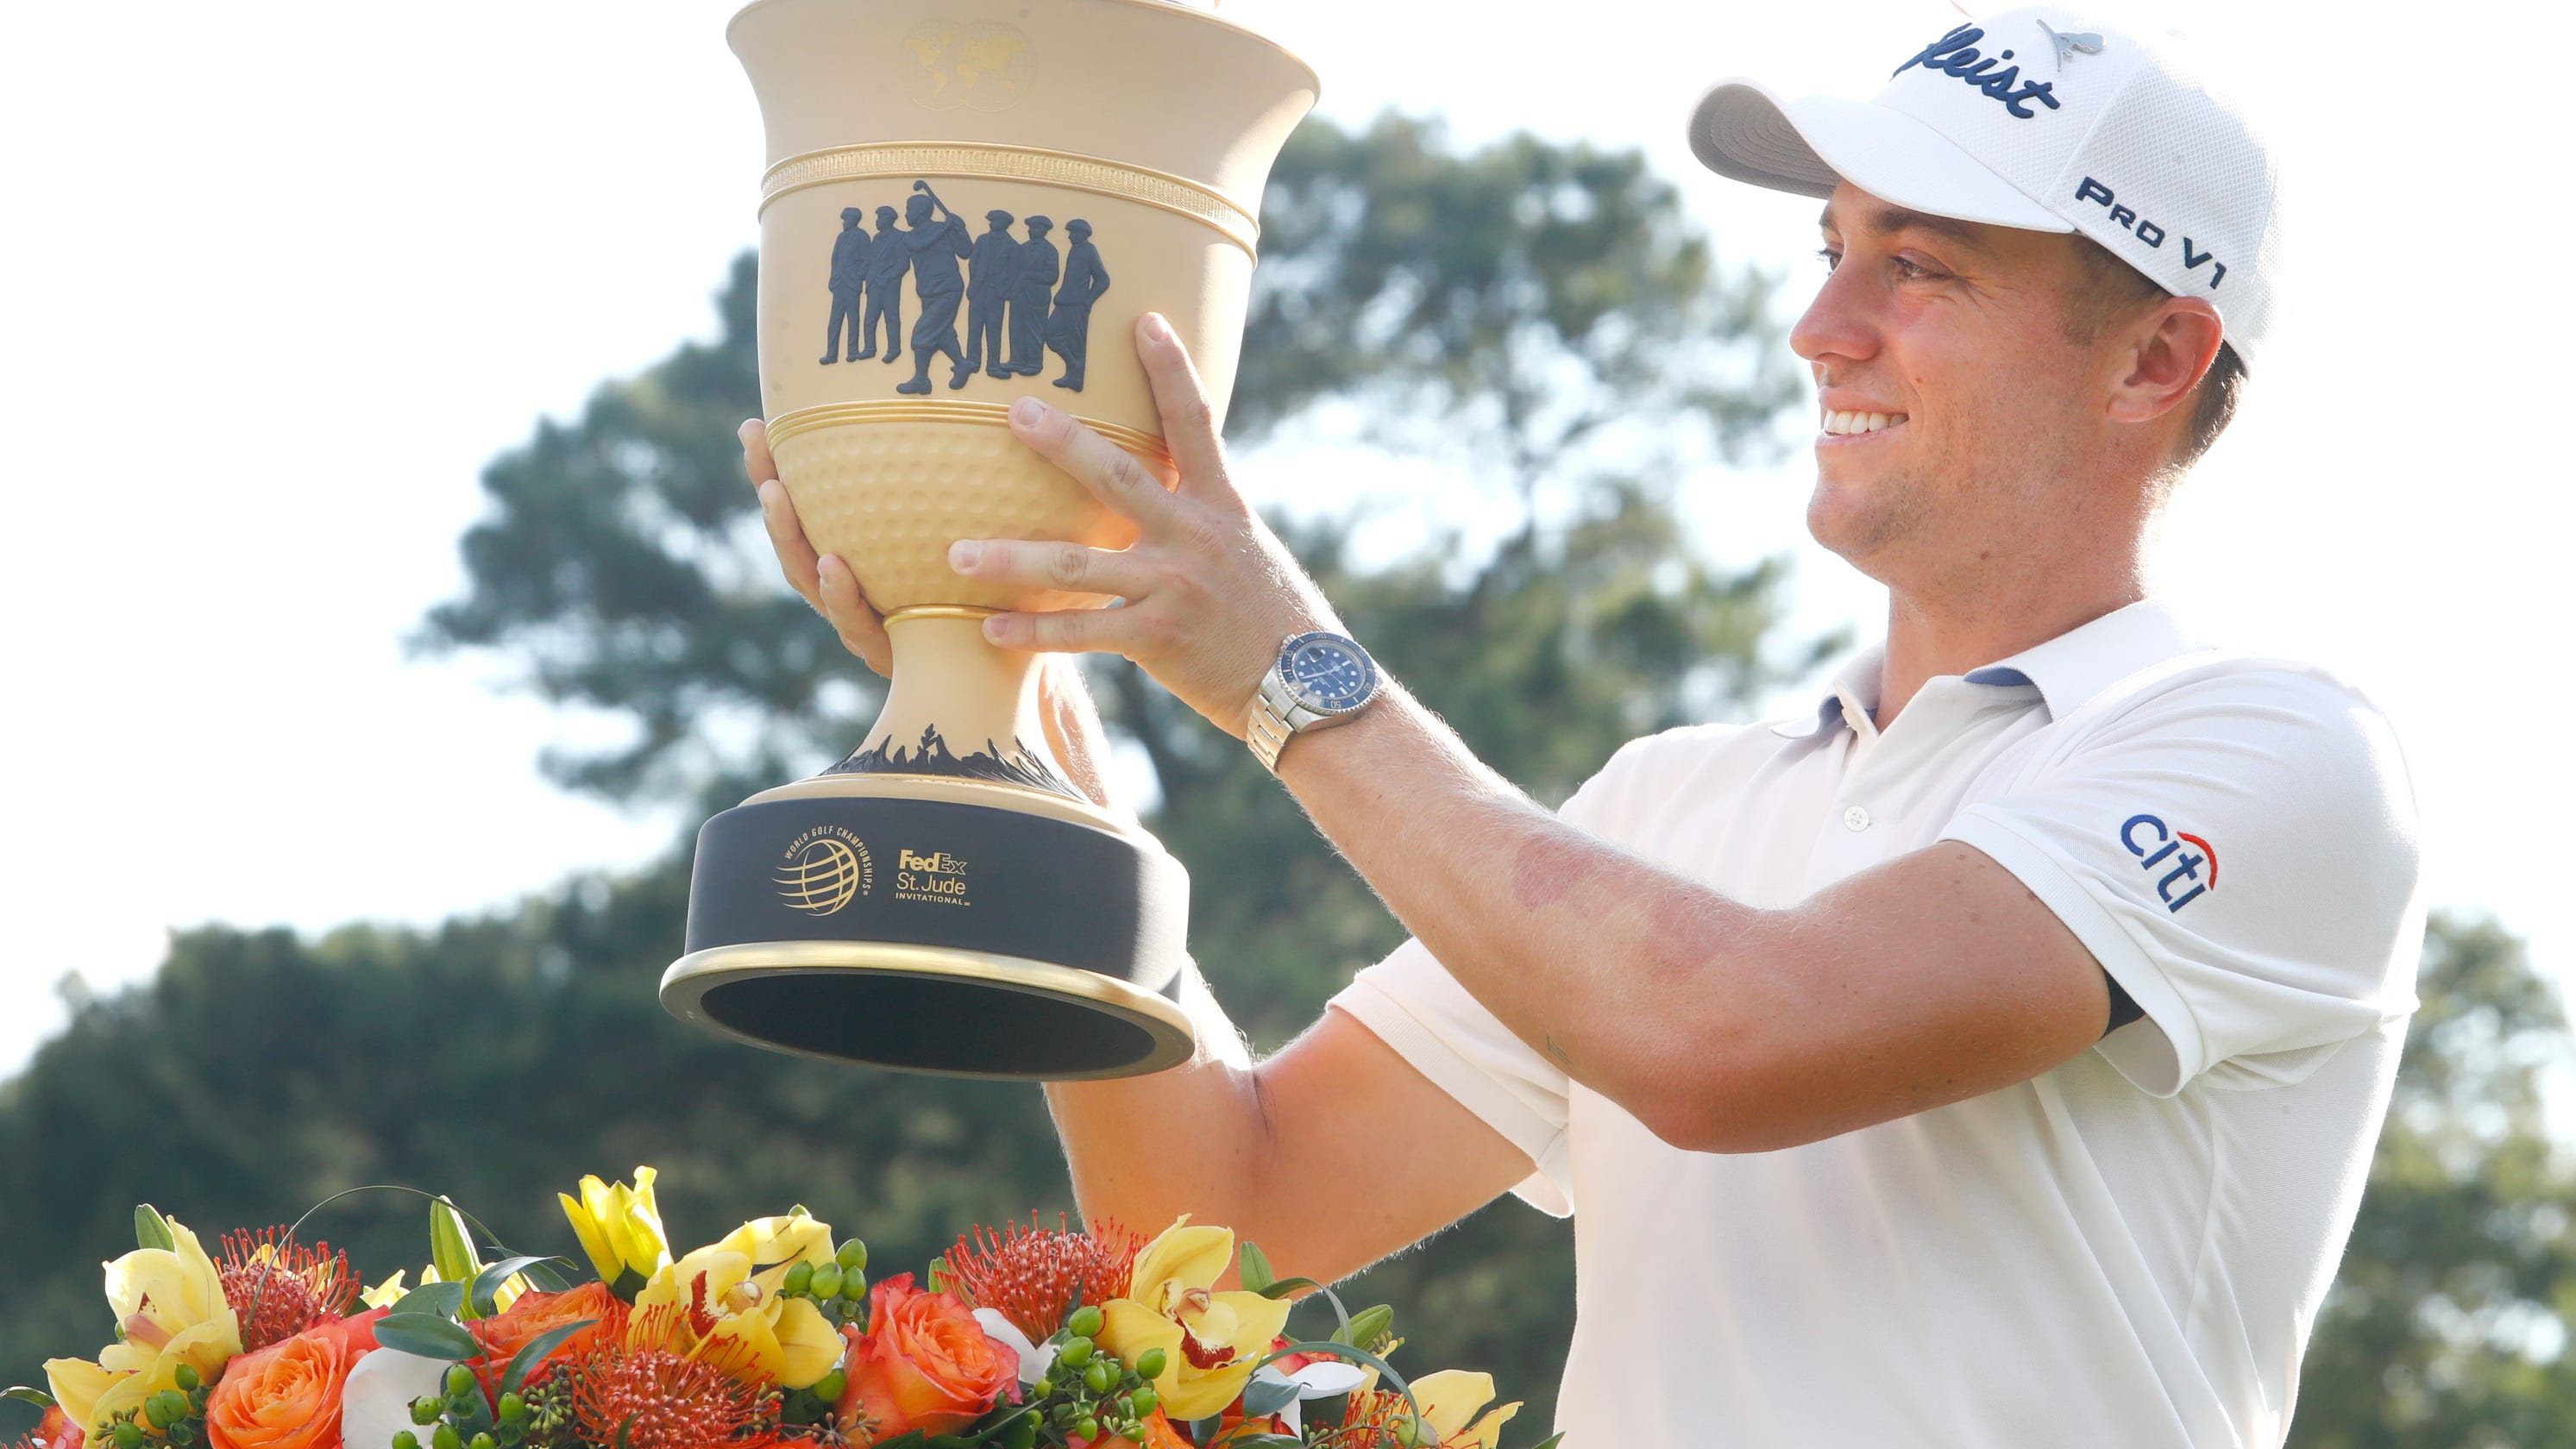 Flipboard: Justin Thomas won the 2020 WGC-FedEx St. Jude Invitational in thrilling fashion. Let's never do it again.